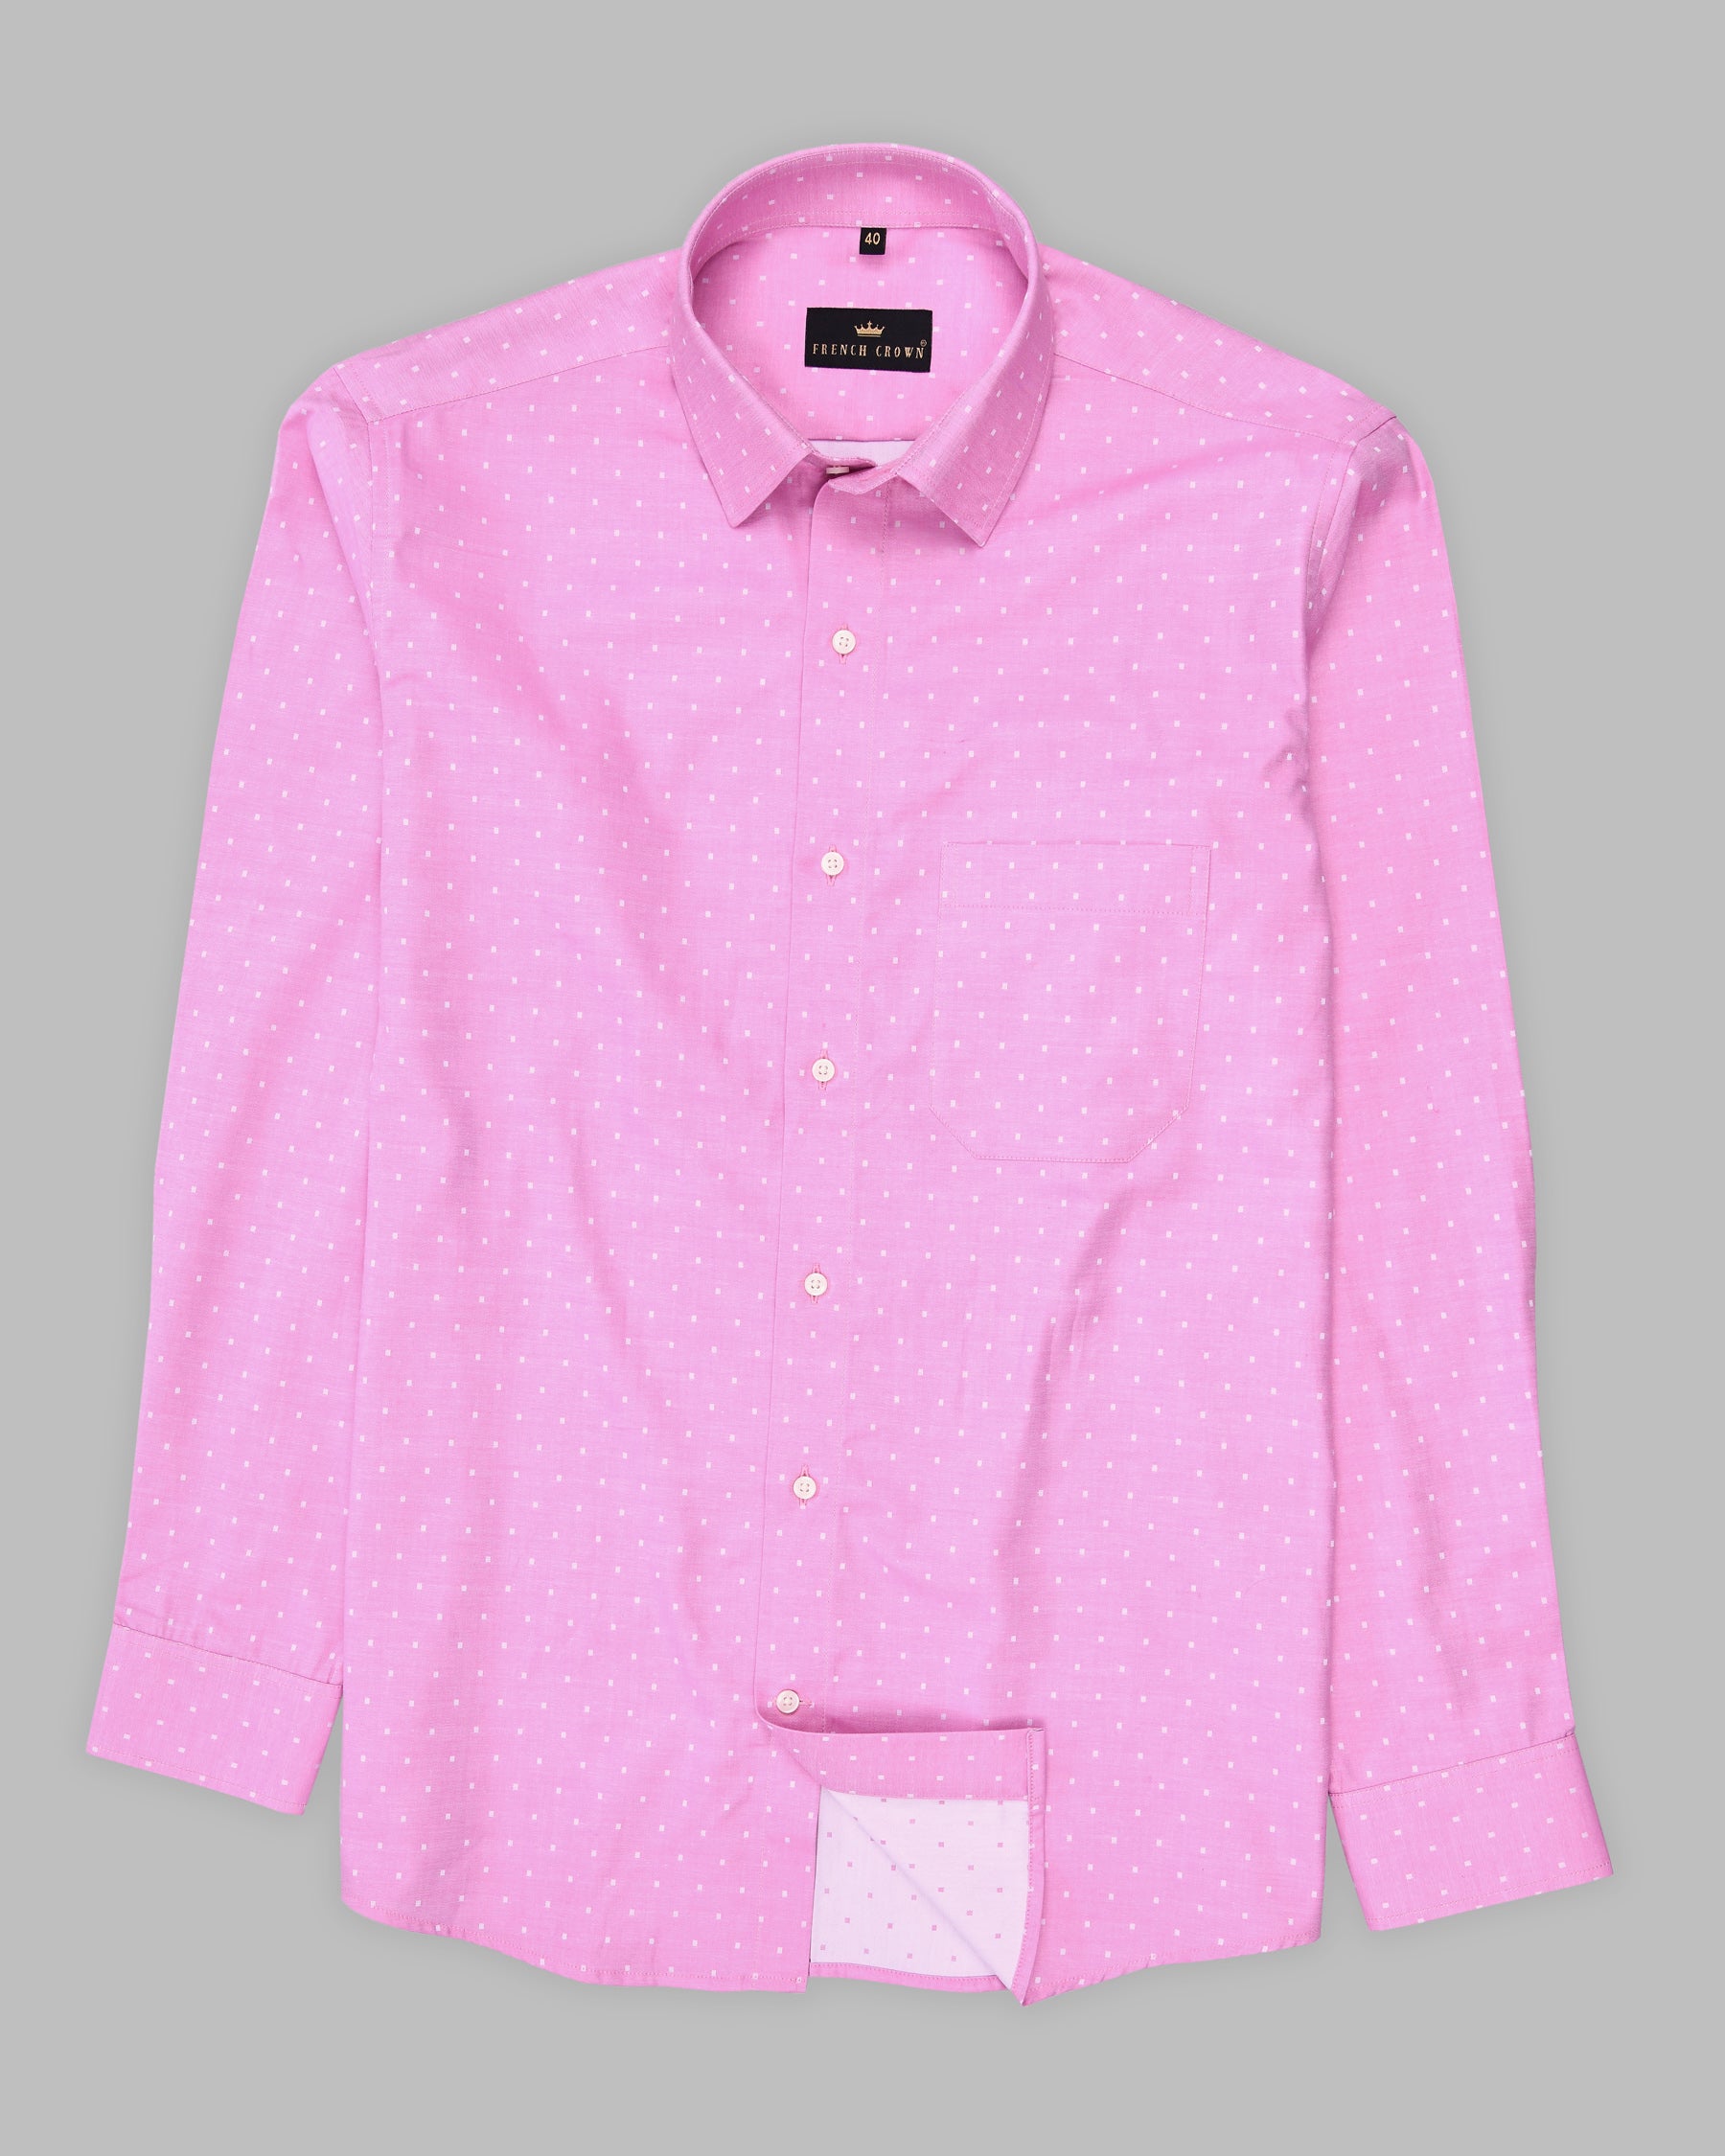 Orchid-Chantilly Pink Dobby Textured Premium Giza Cotton Shirt